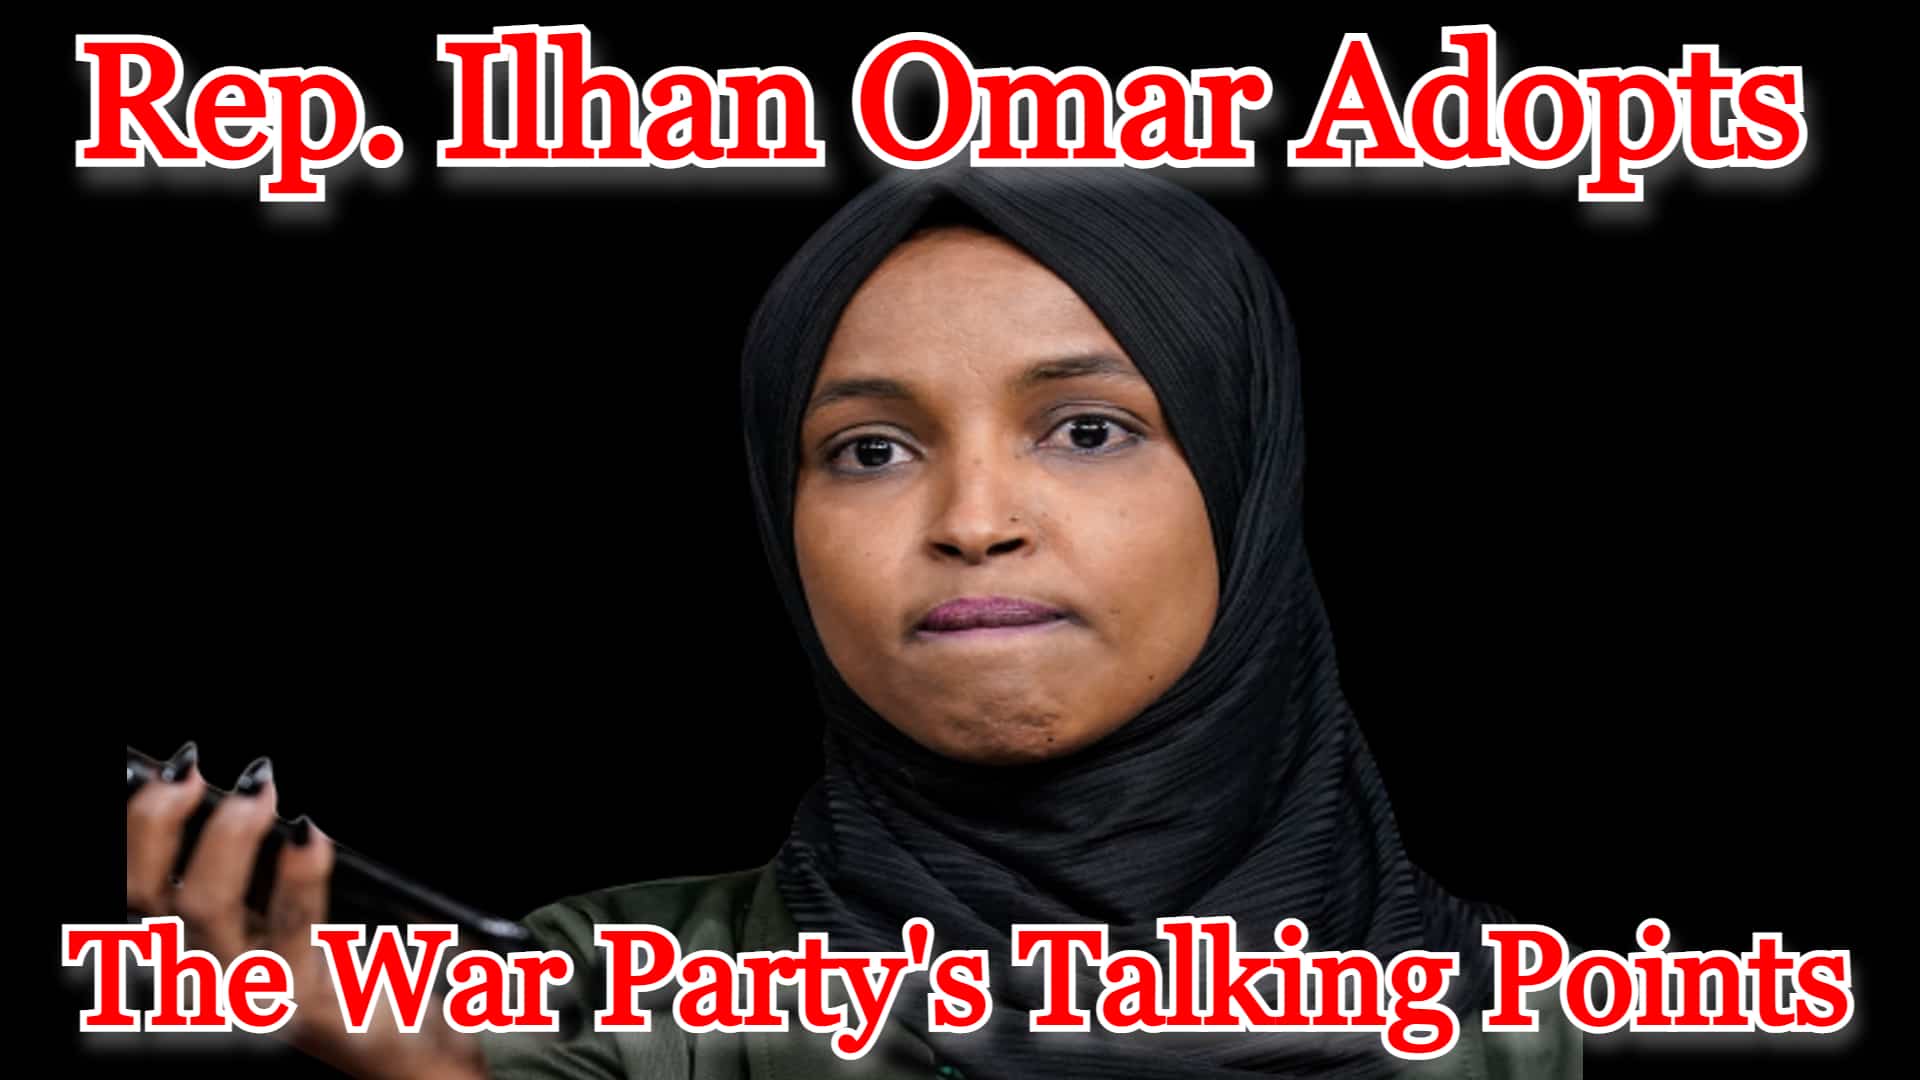 COI #343: Rep. Ilhan Omar Adopts the War Party’s Talking Points